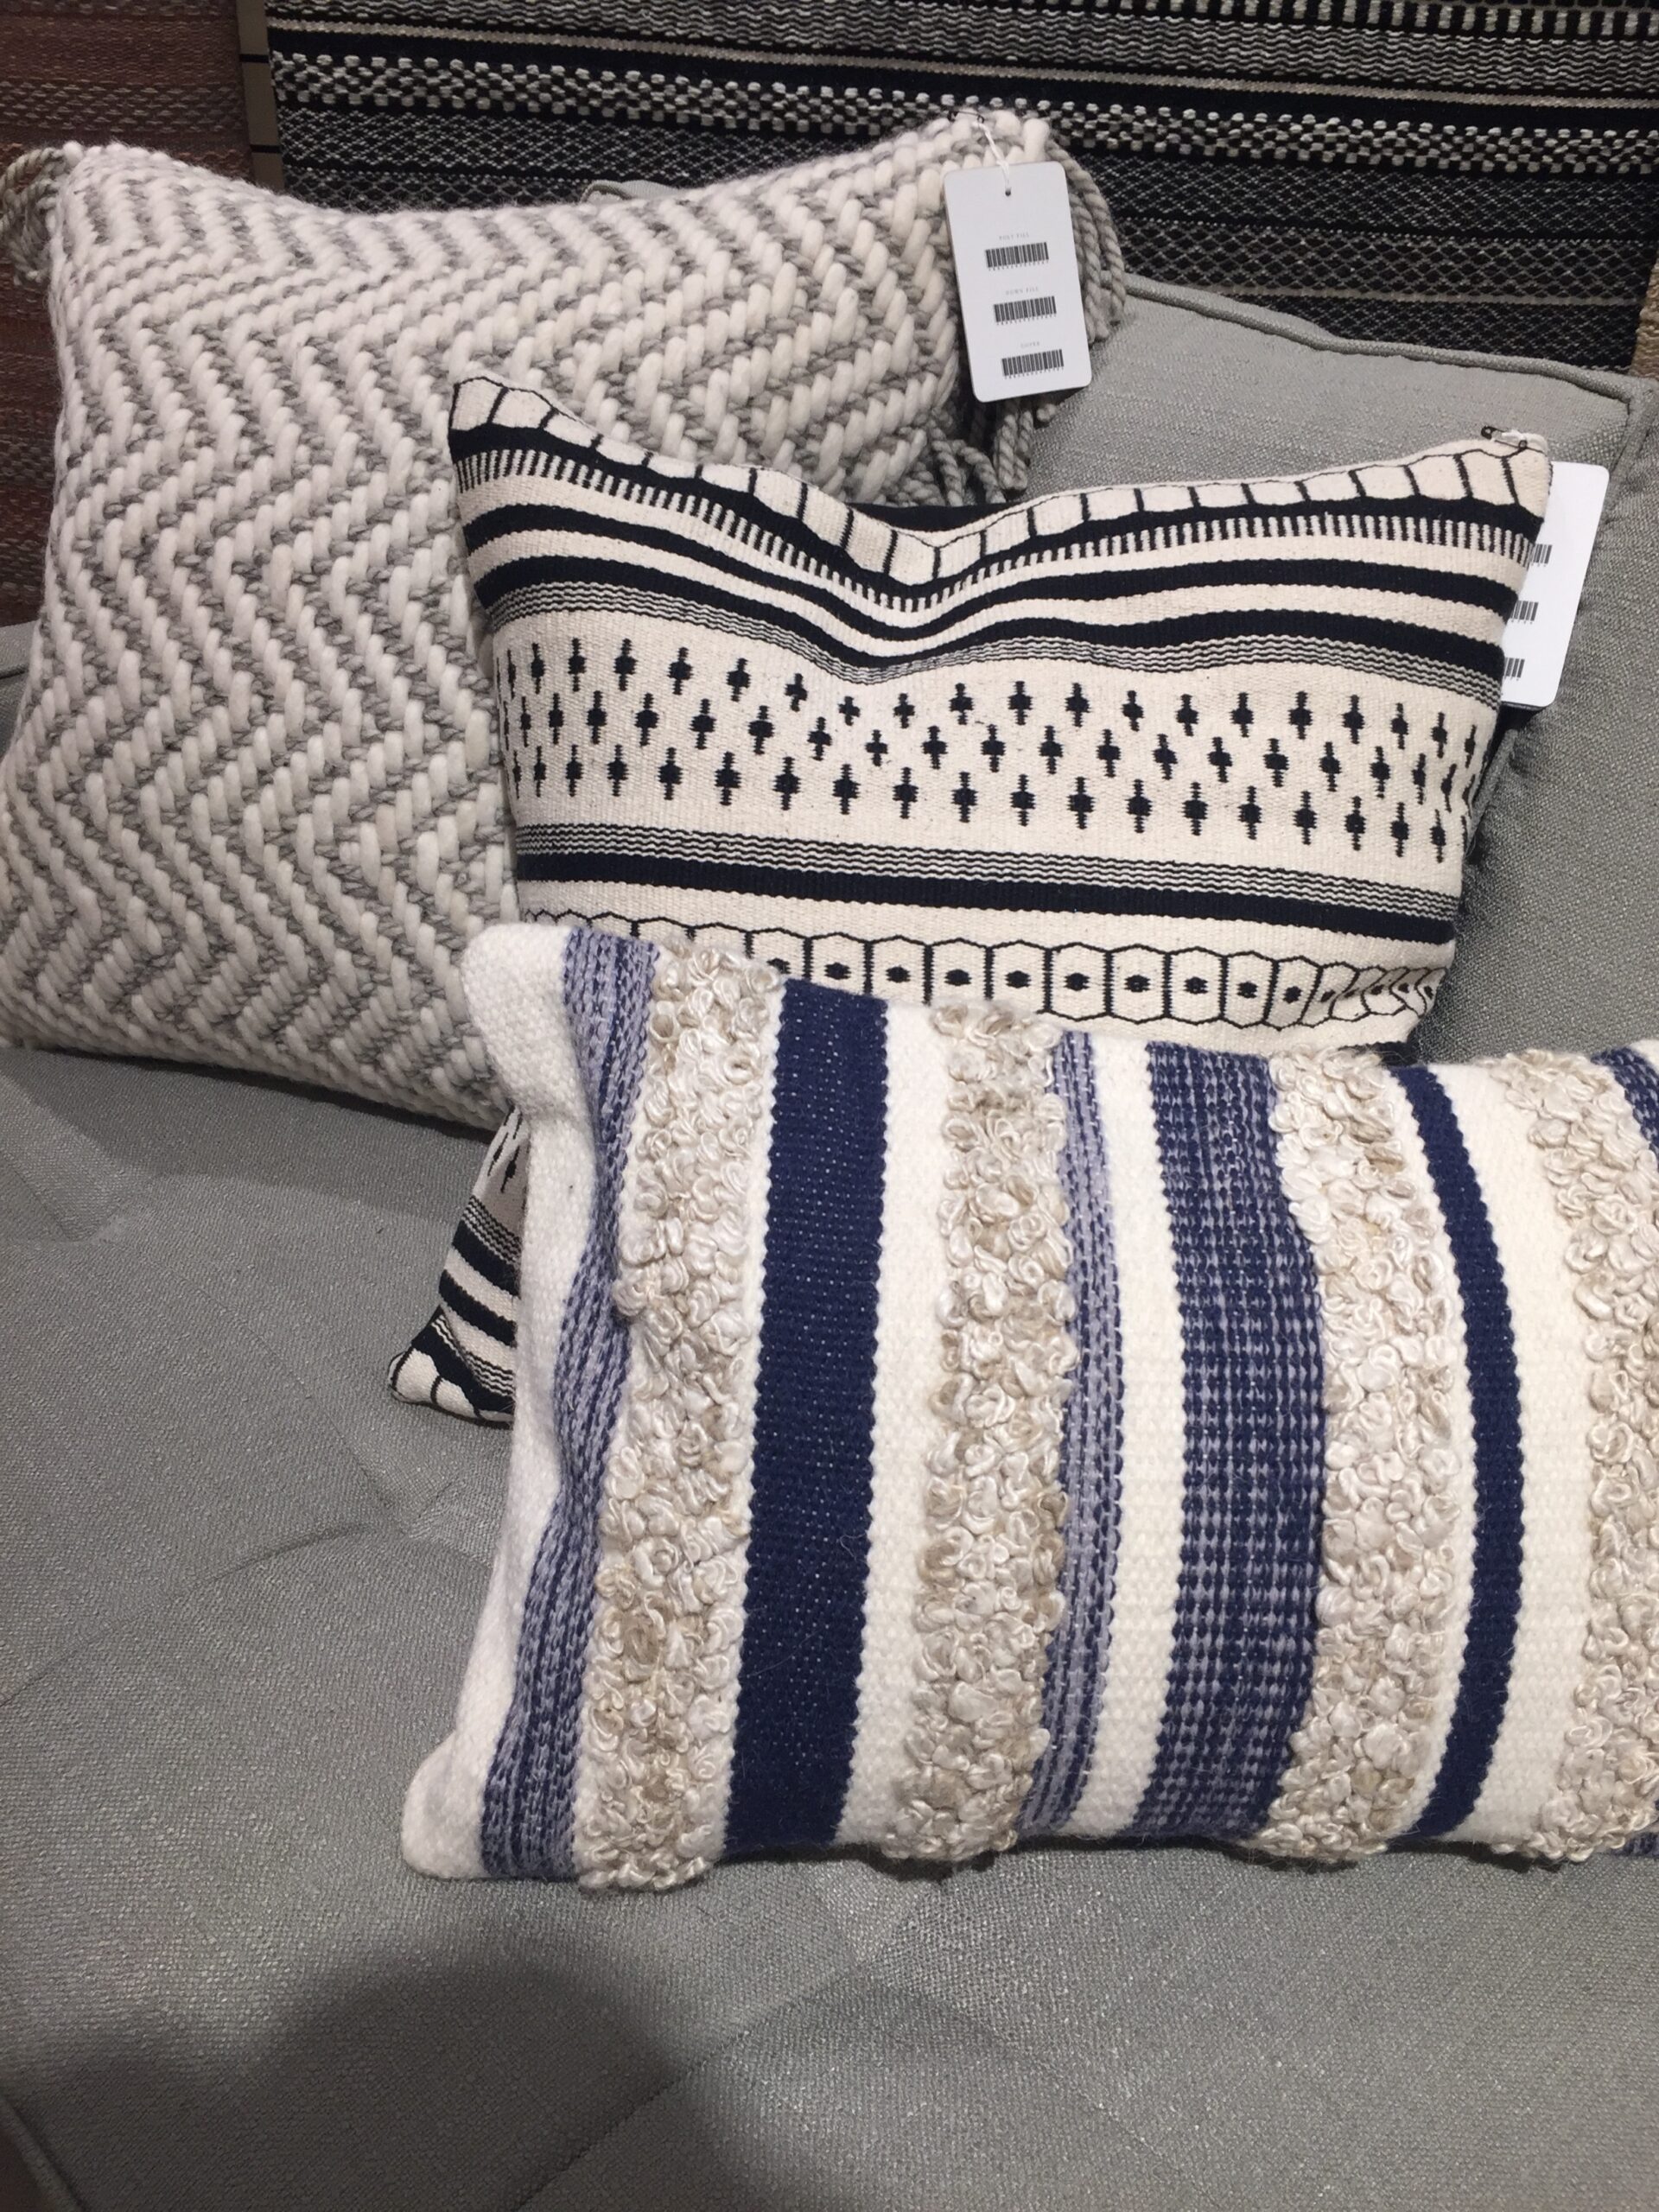 The throw pillows are from Loloi Rugs showroom. What a wonderful mix of color, pattern and texture